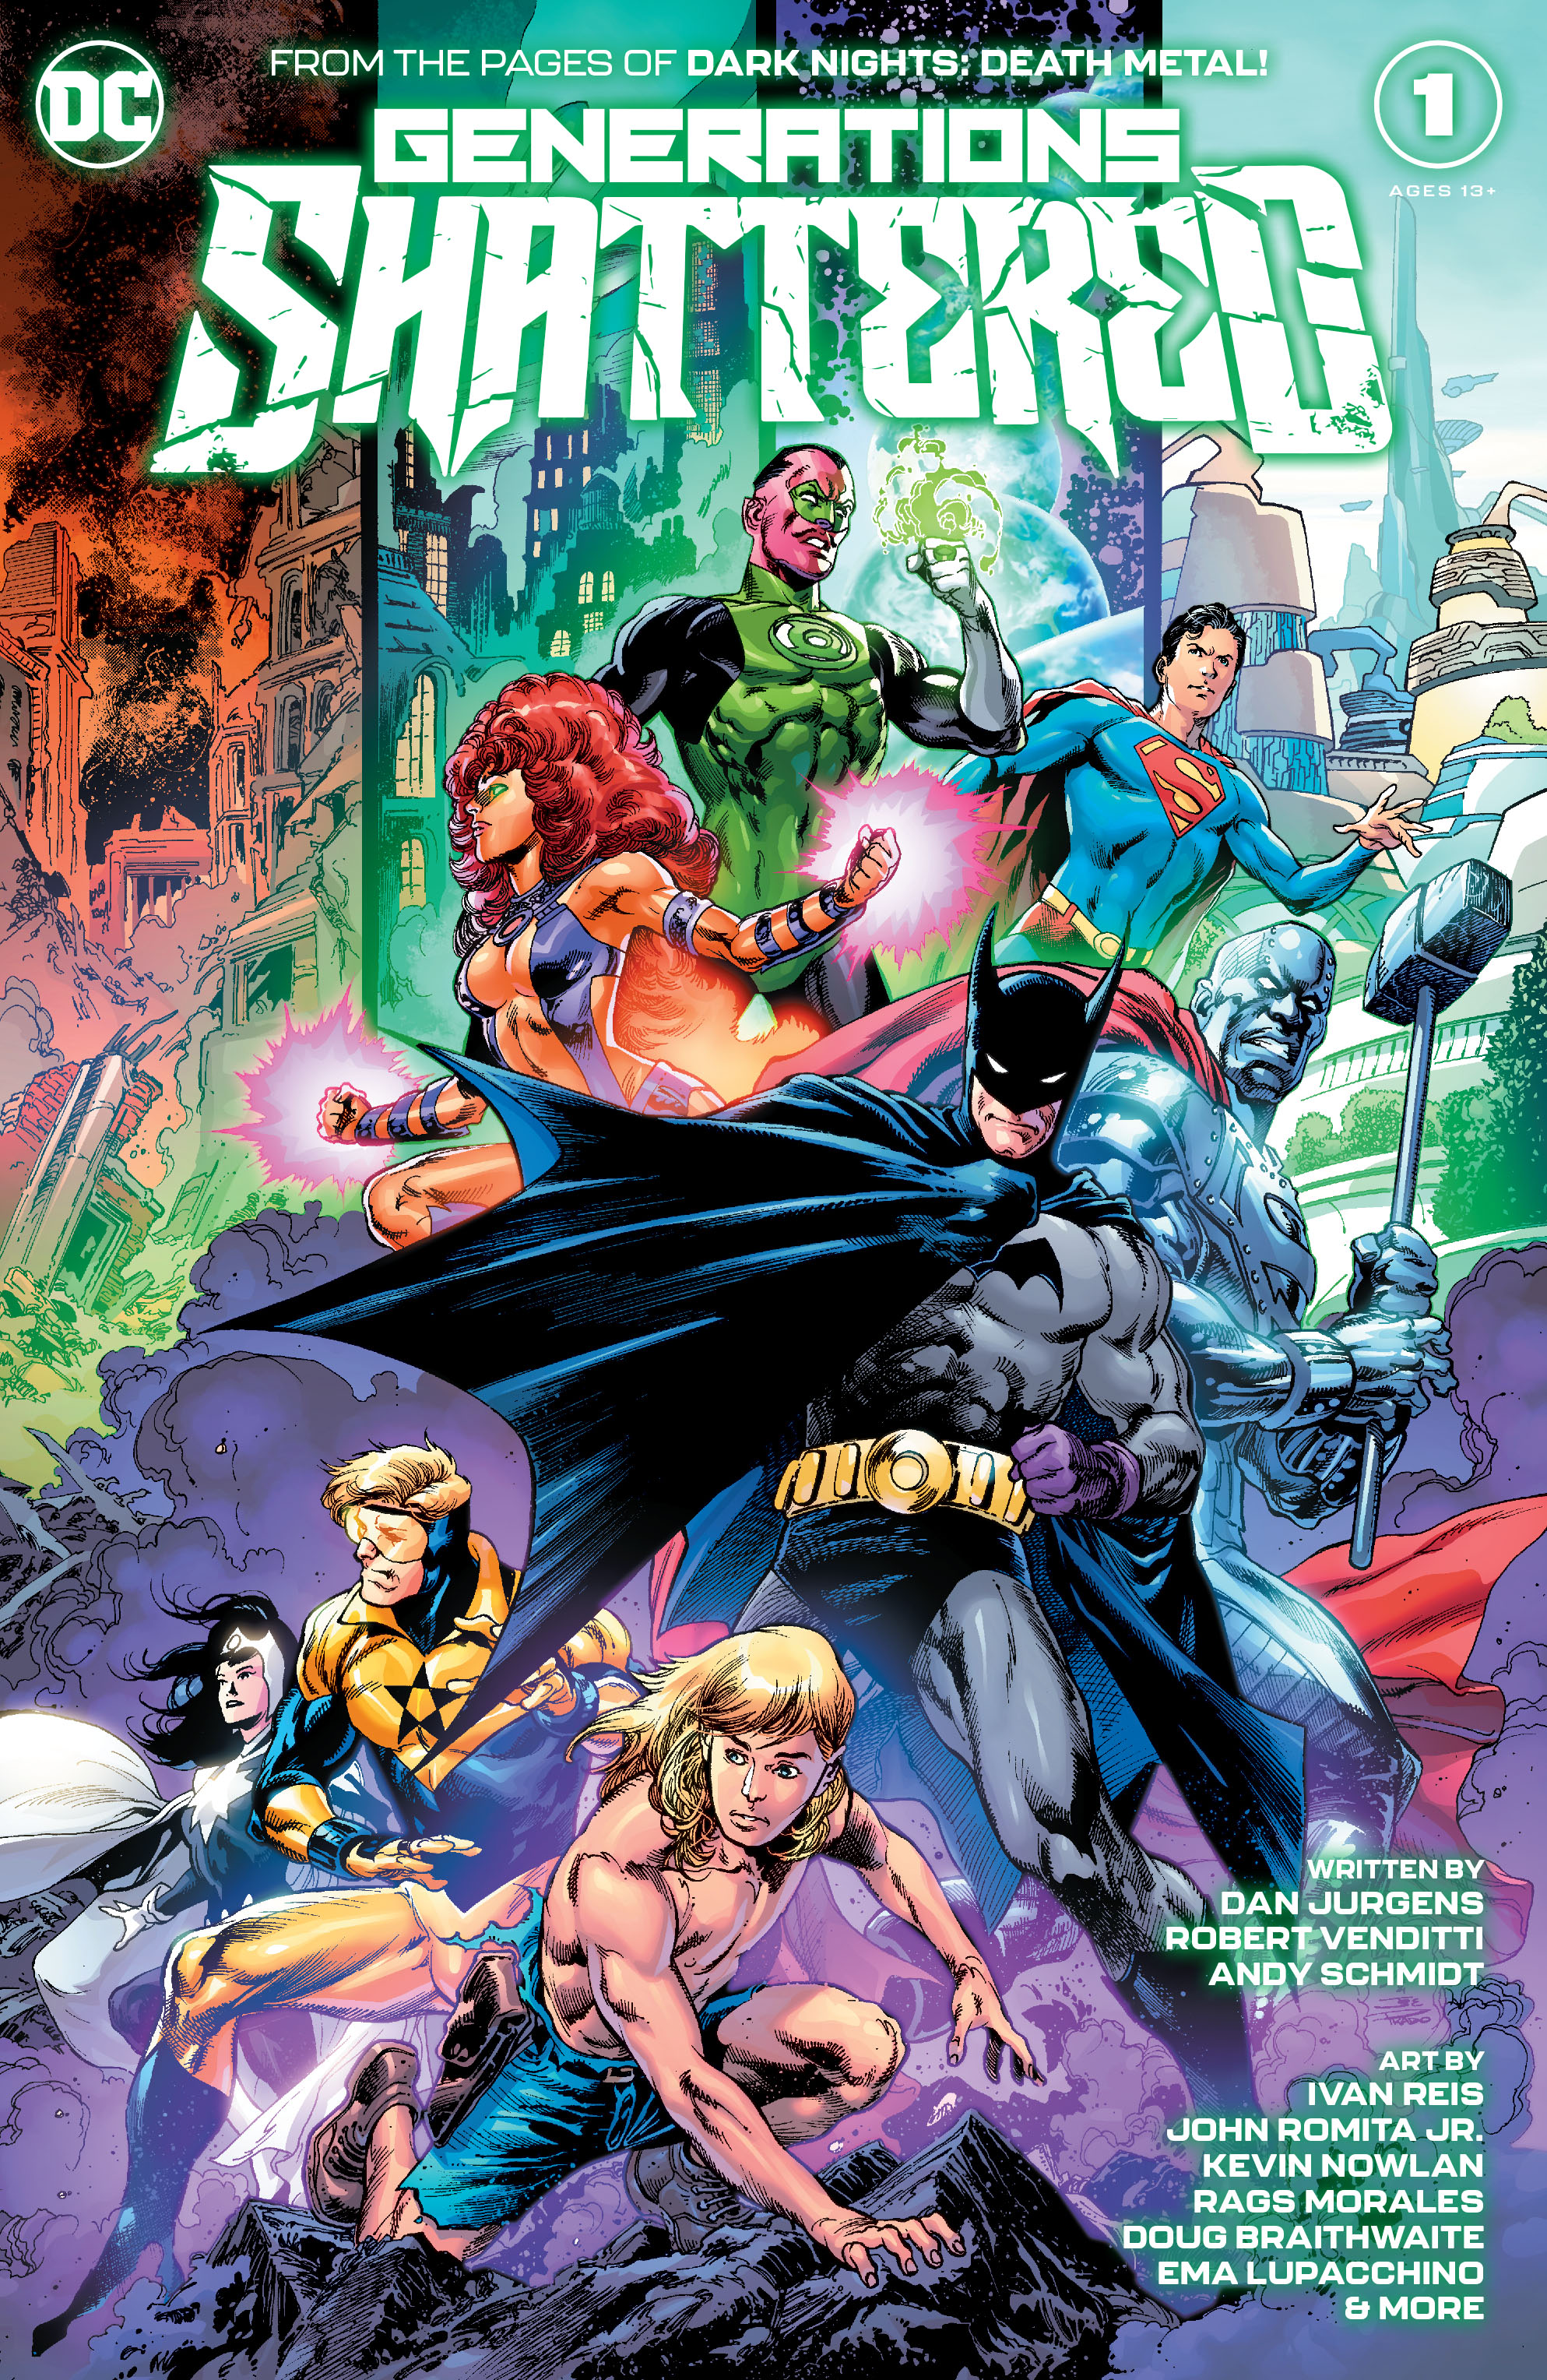 Read online Generations Shattered comic -  Issue # Full - 1